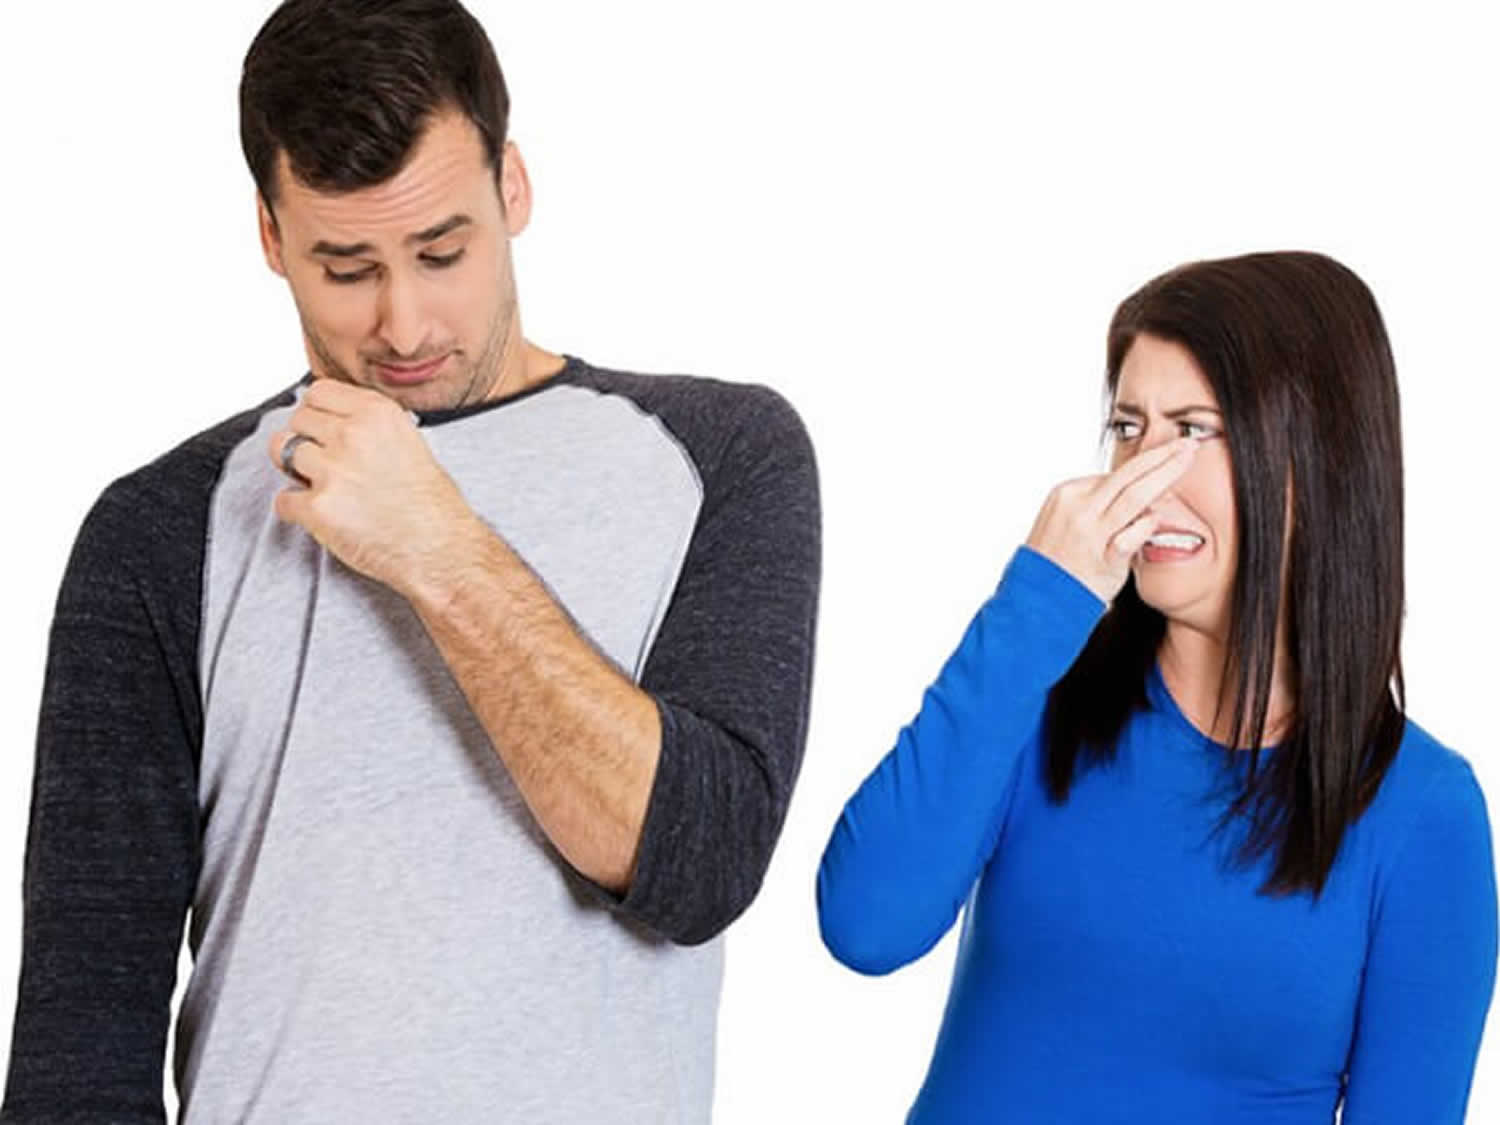 Body Odor Causes And How To Get Rid Of Body Odor